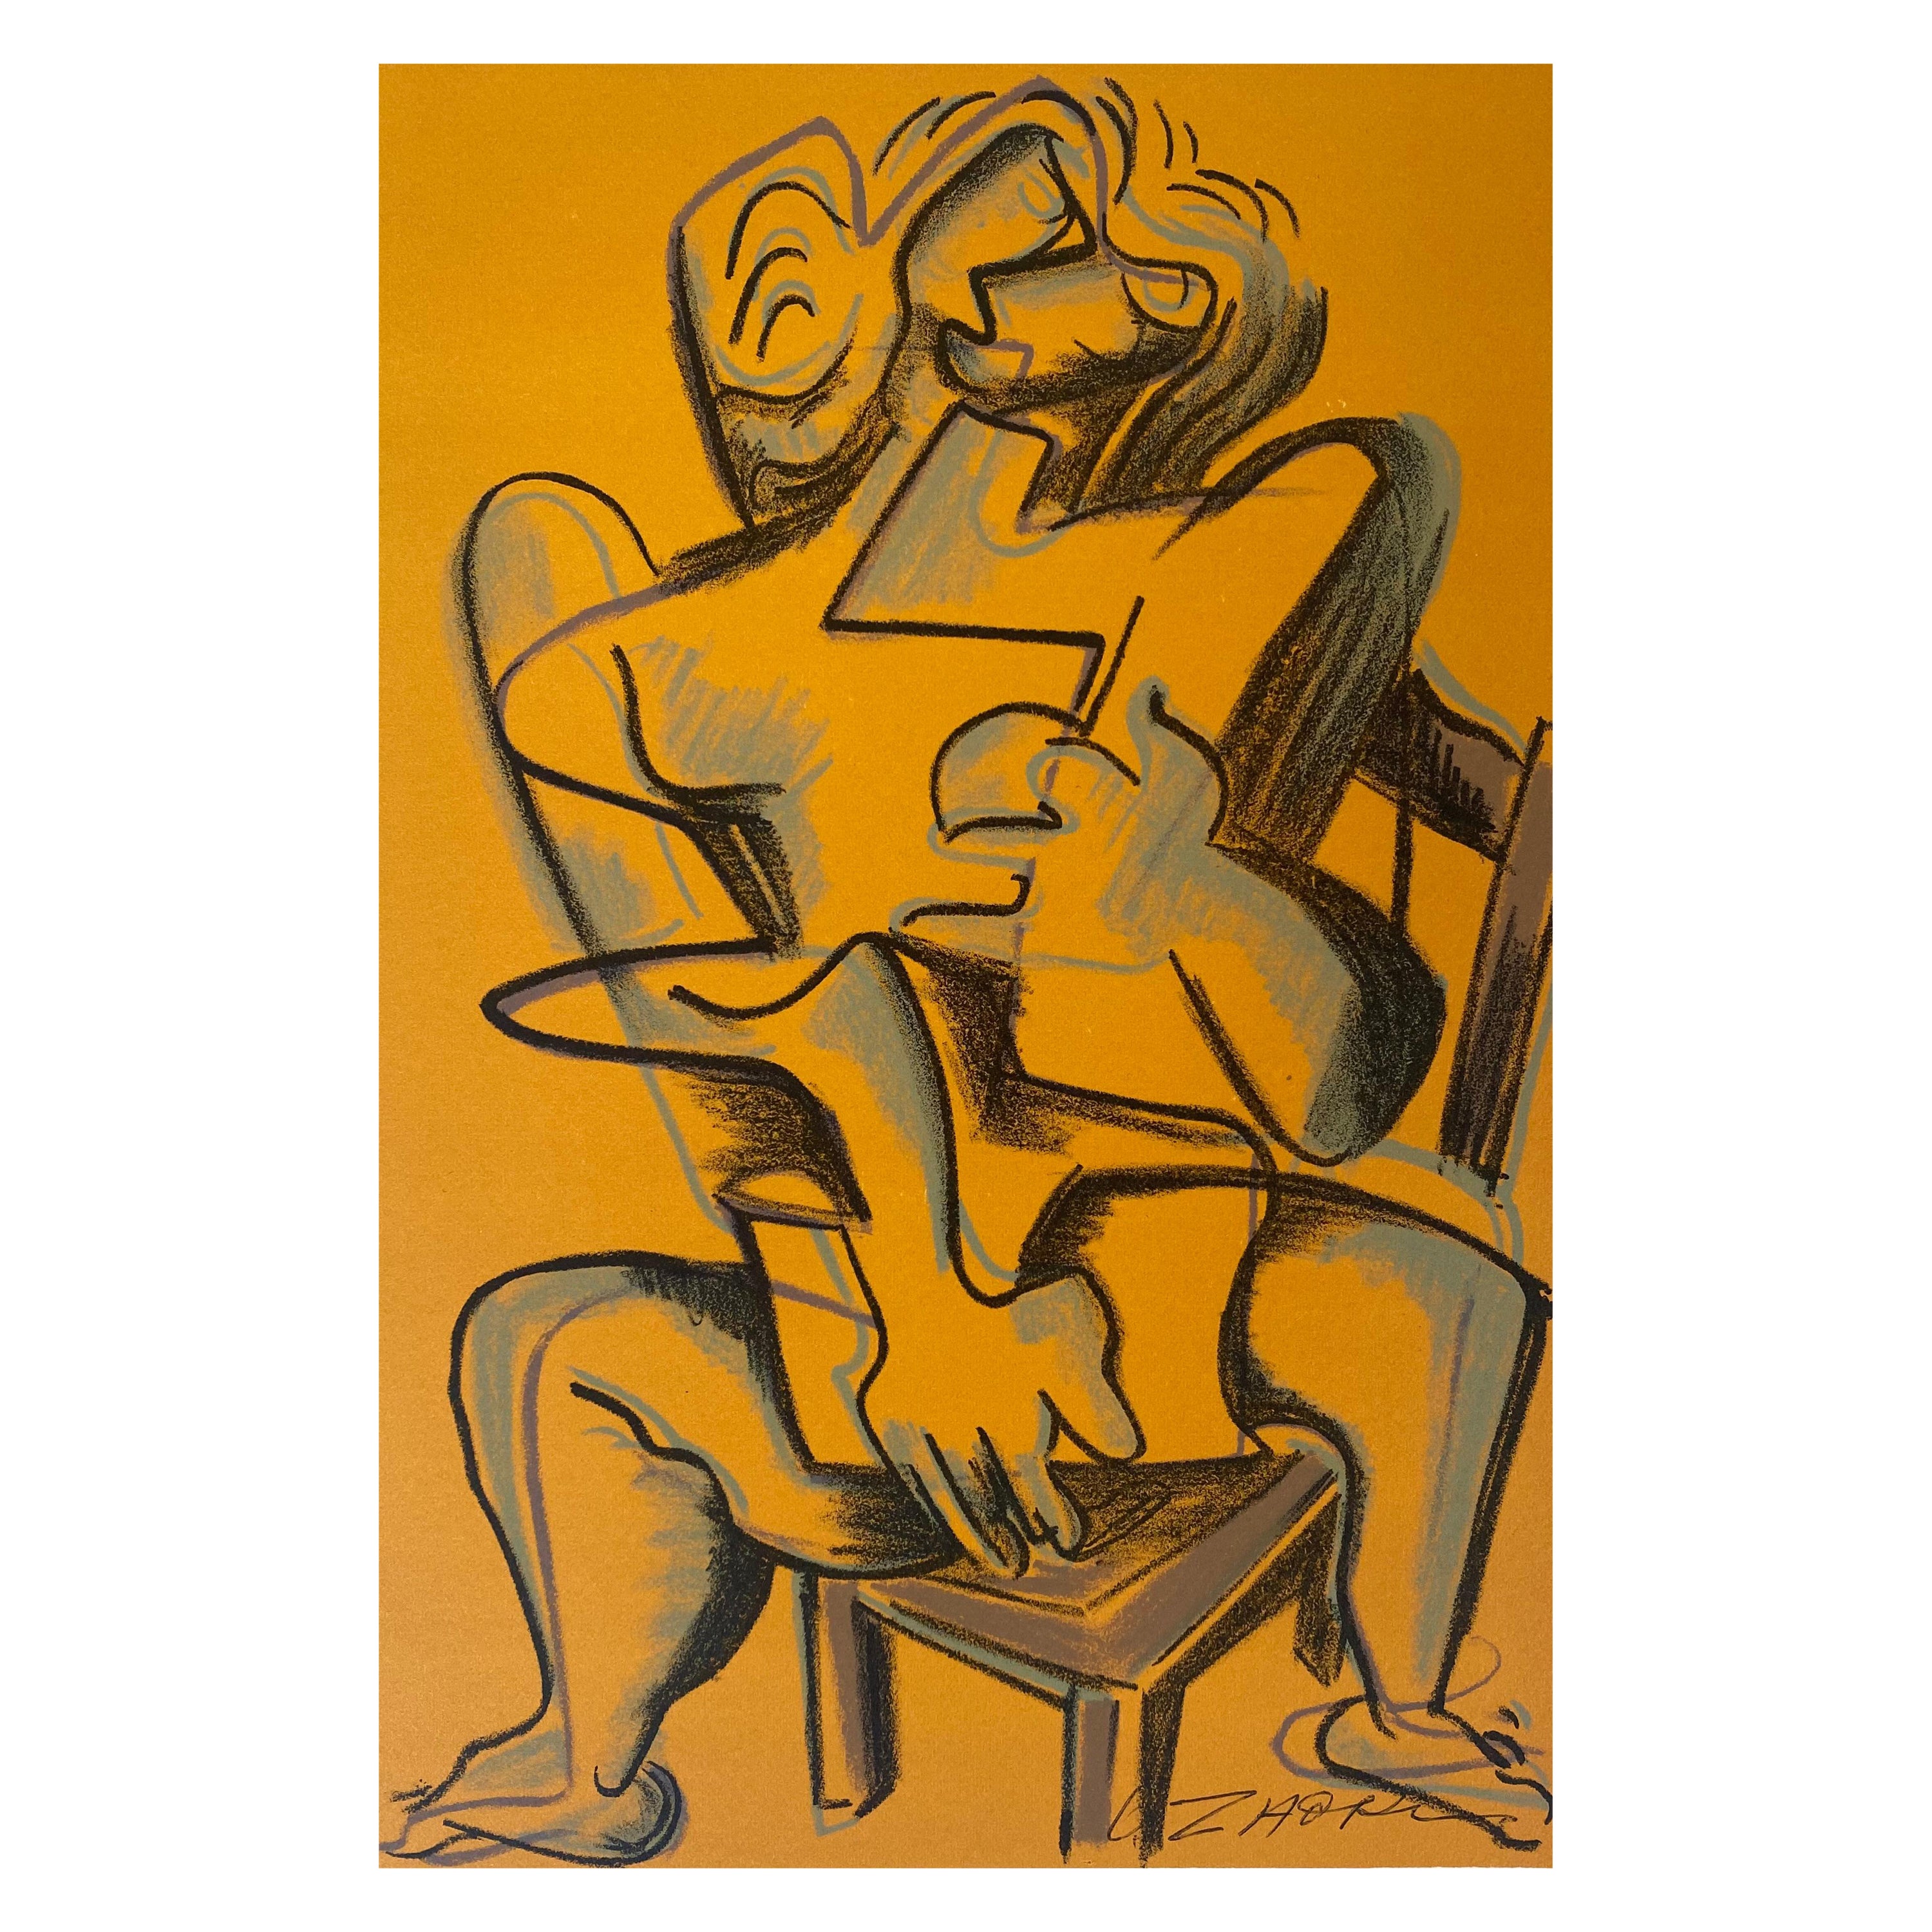 Lithography "The works of Hercules", Yellow, Zadkine